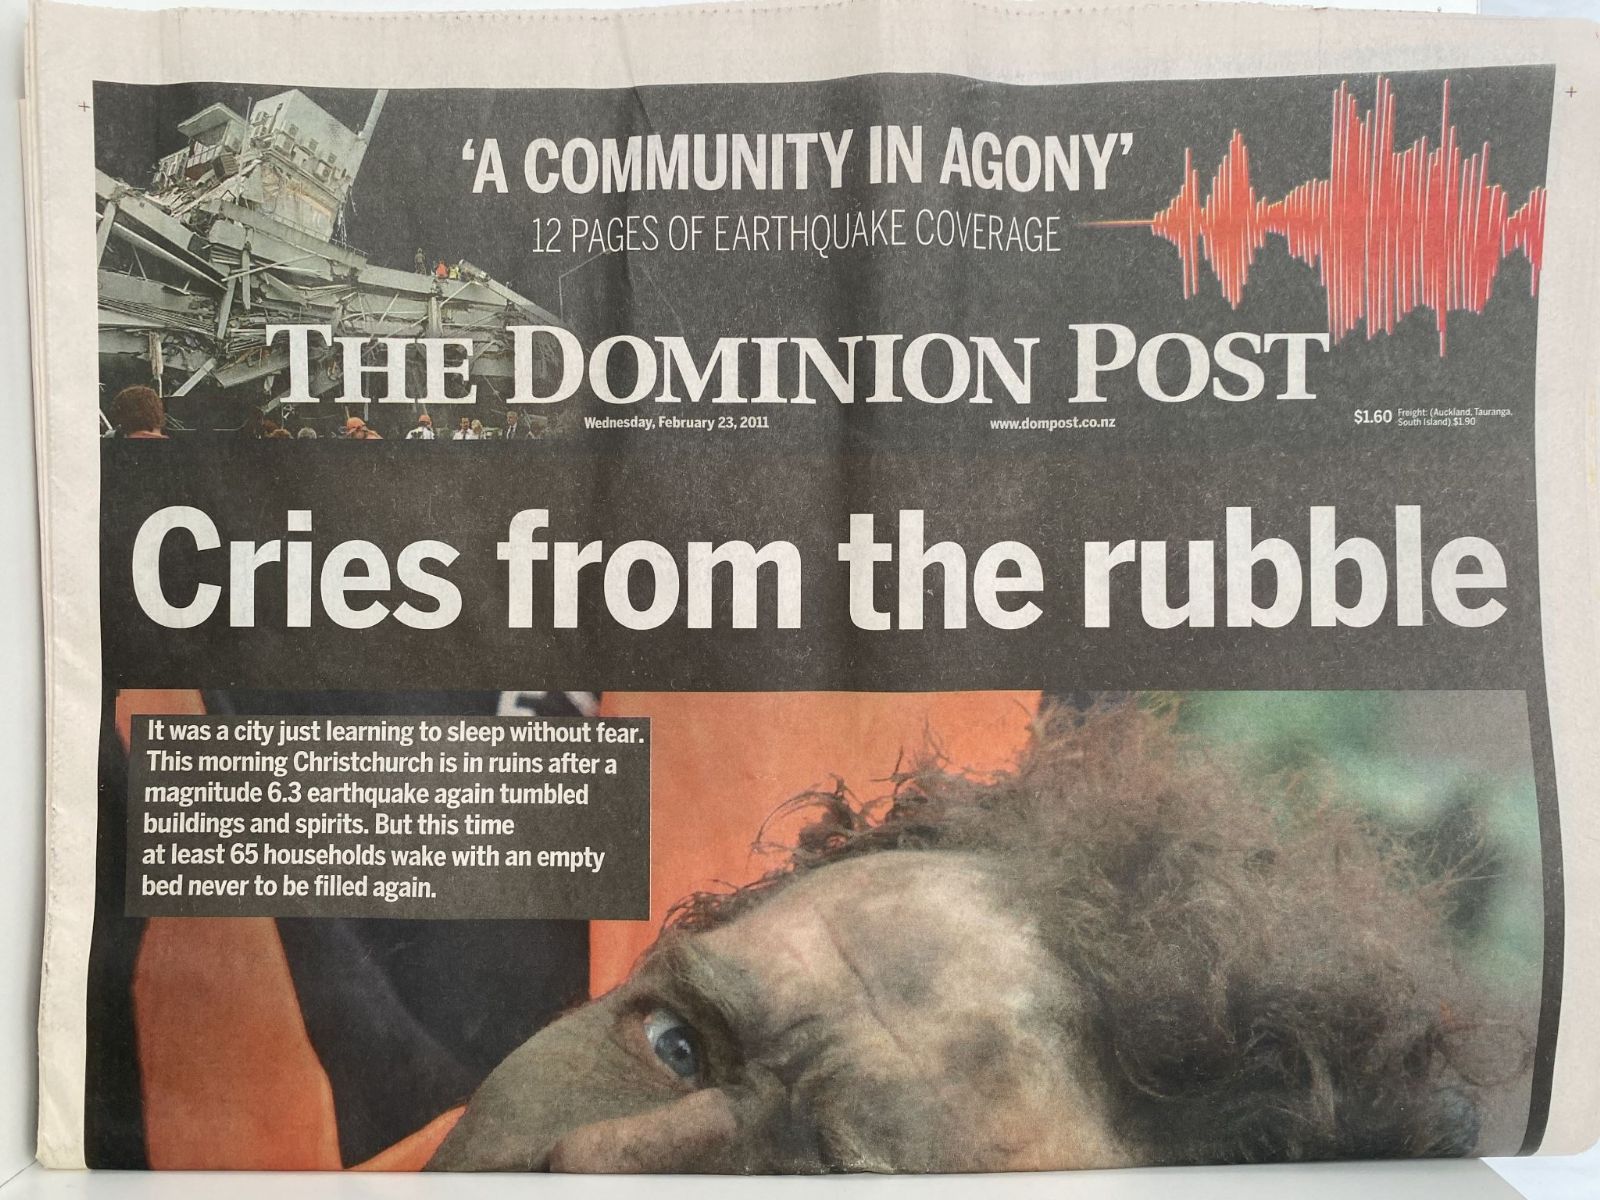 OLD NEWSPAPER: The Dominion Post, 23 February 2011 - Christchurch earthquakes